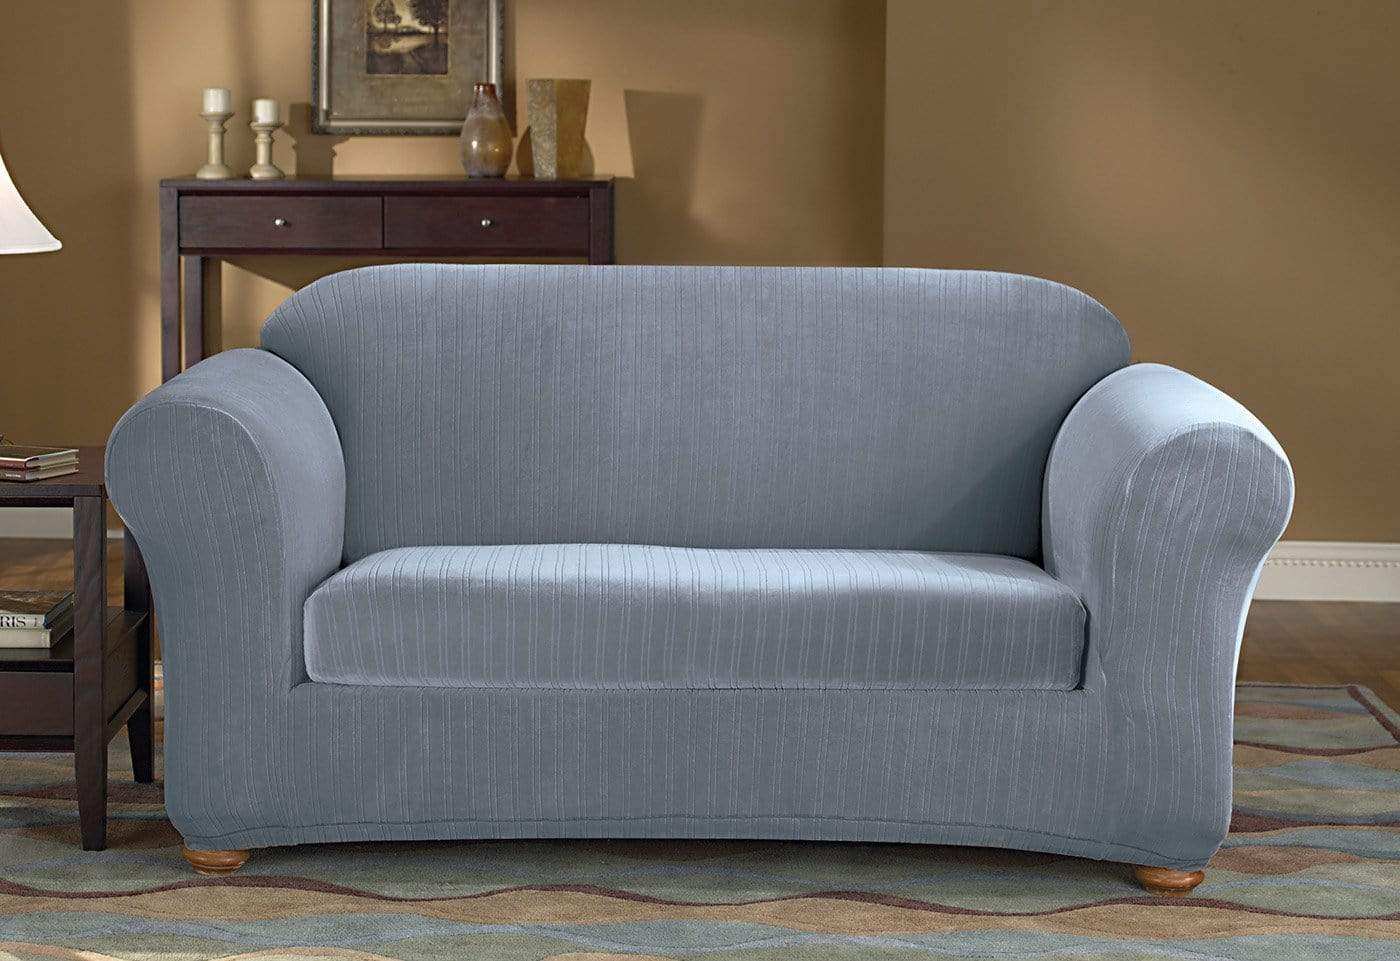 SureFit Stretch Pinstripe Two Piece Sofa Slipcover   Form Fit   Box Cushion   Machine Washable   Outlet in French Blue